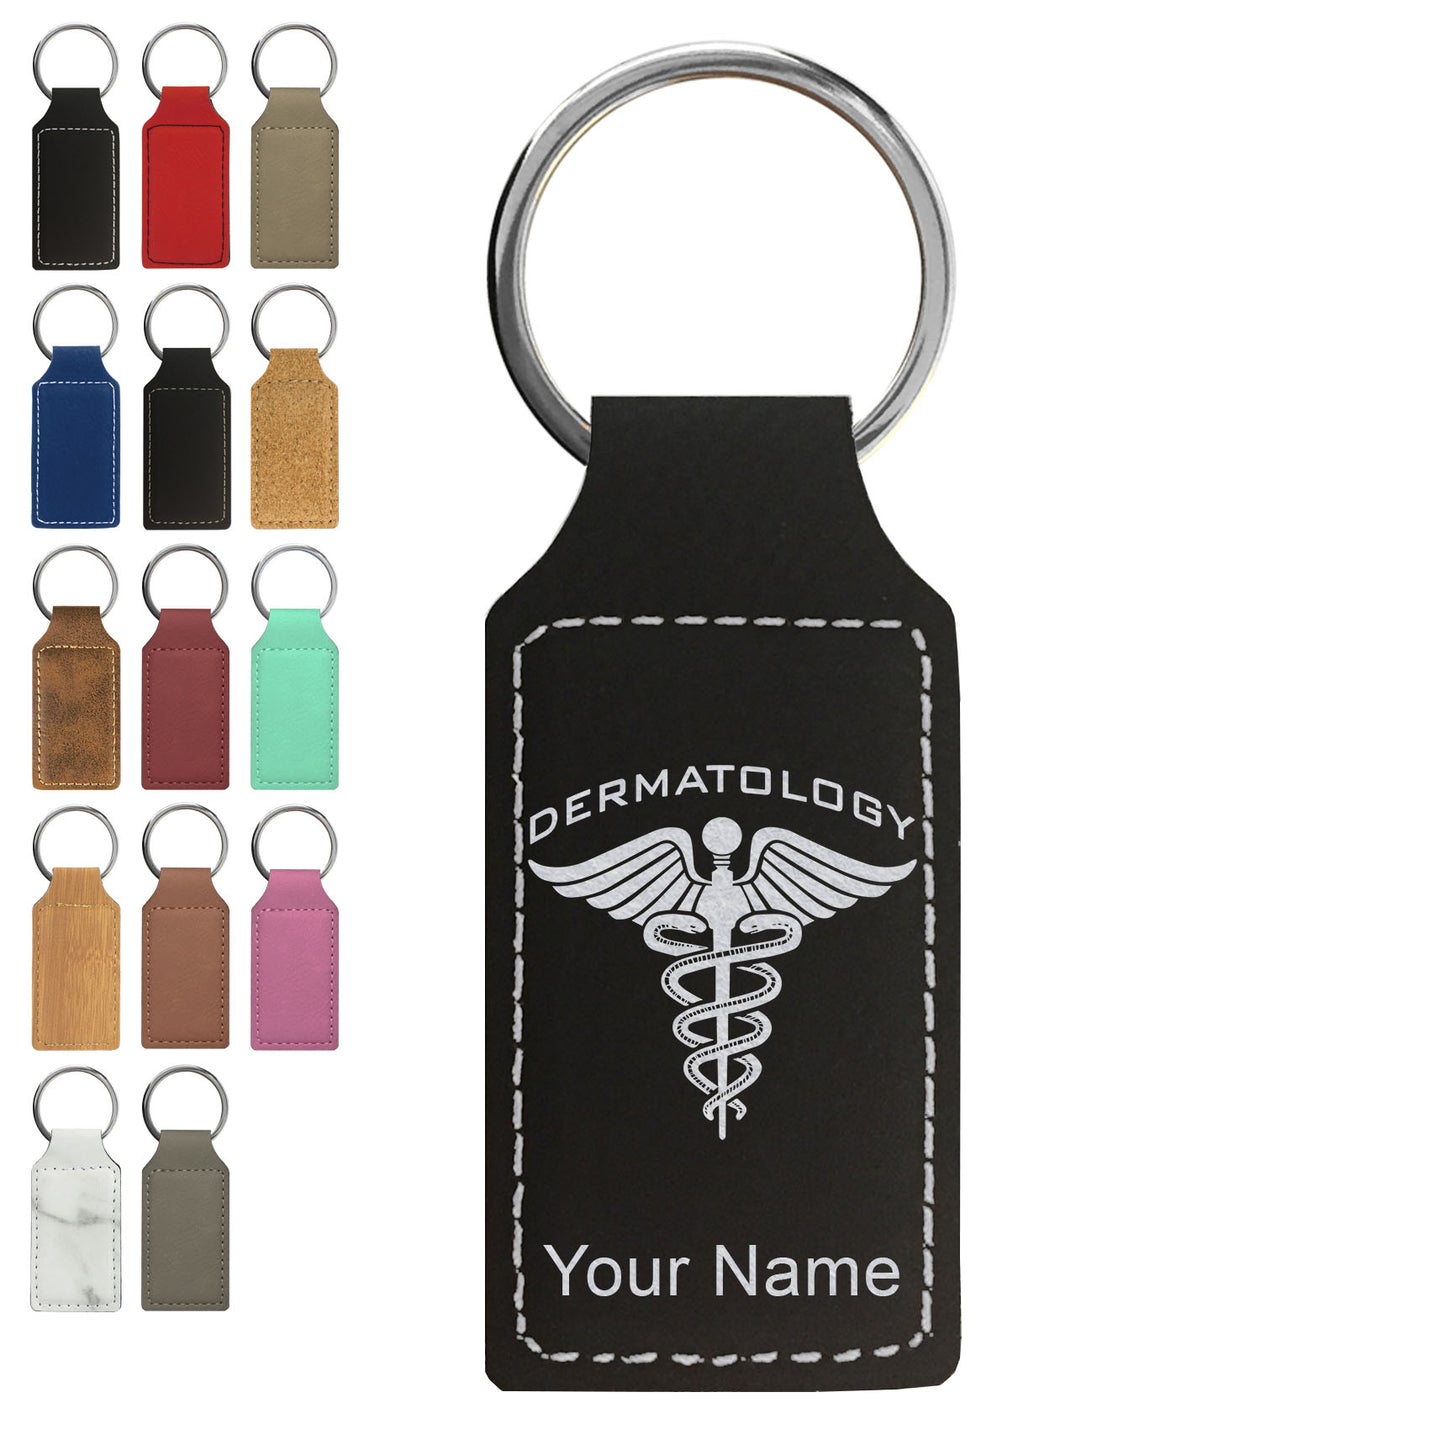 Faux Leather Rectangle Keychain, Dermatology, Personalized Engraving Included